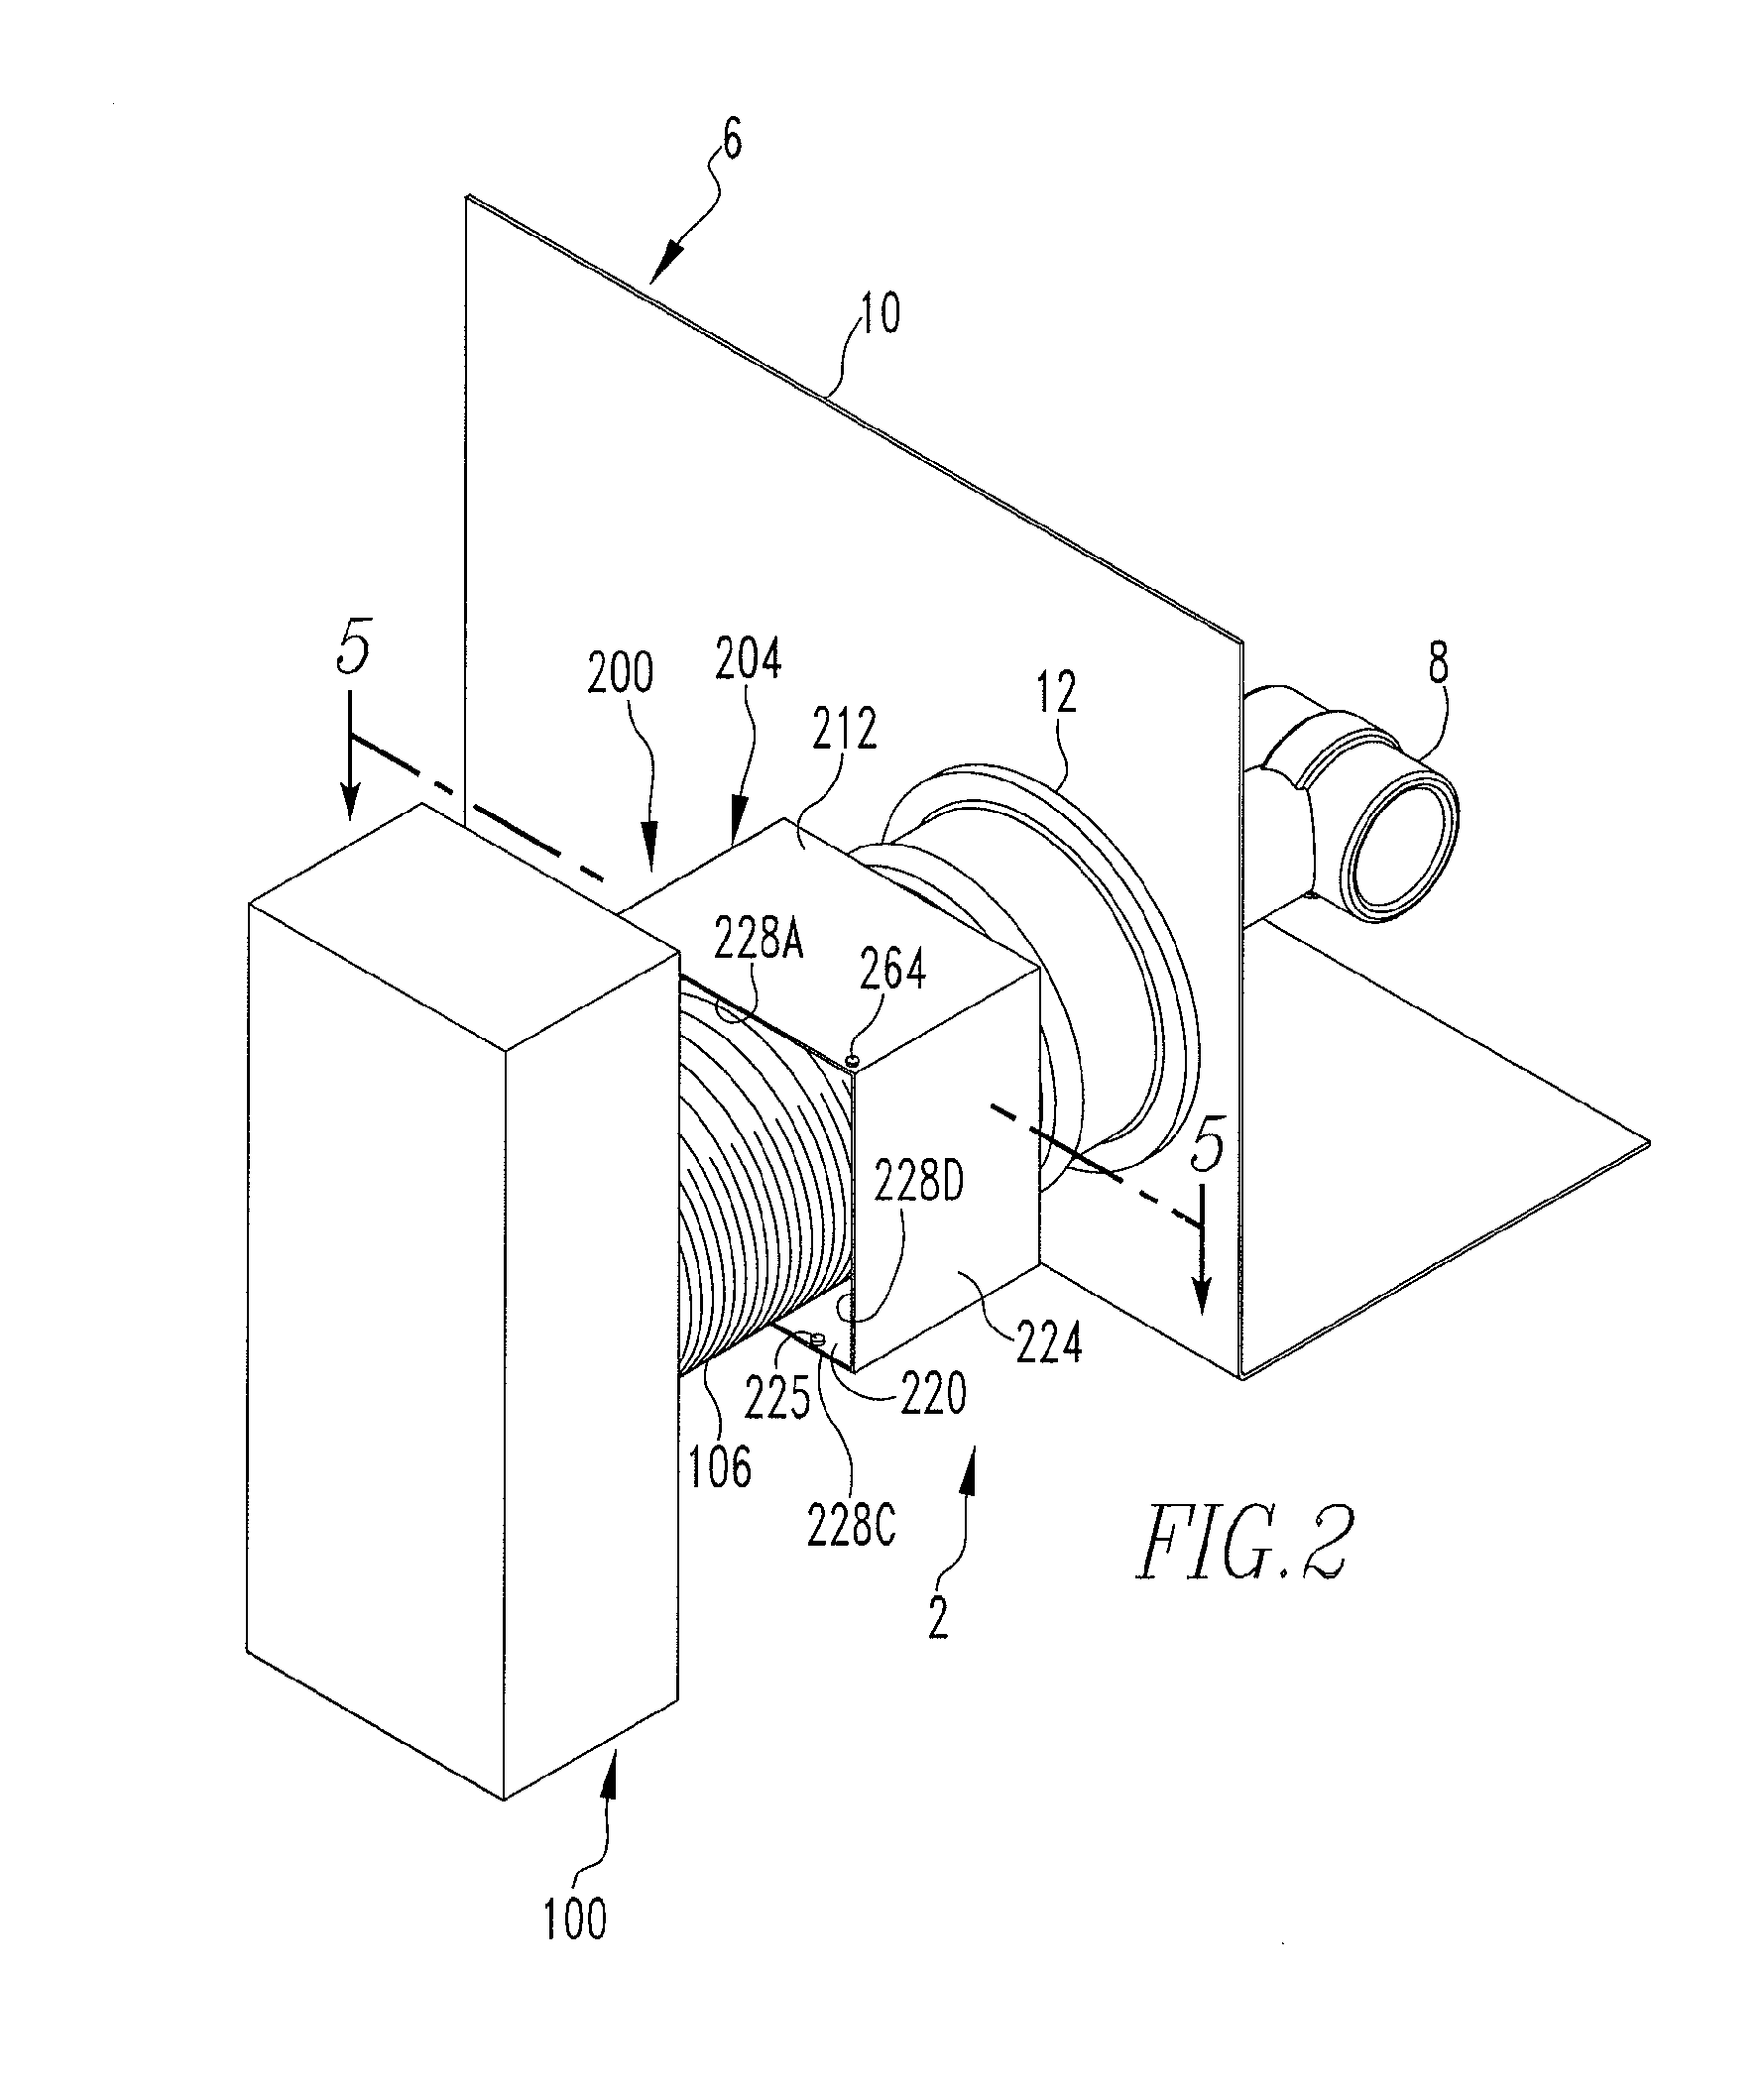 Electrical system having withdrawable electrical apparatus and shutter assembly